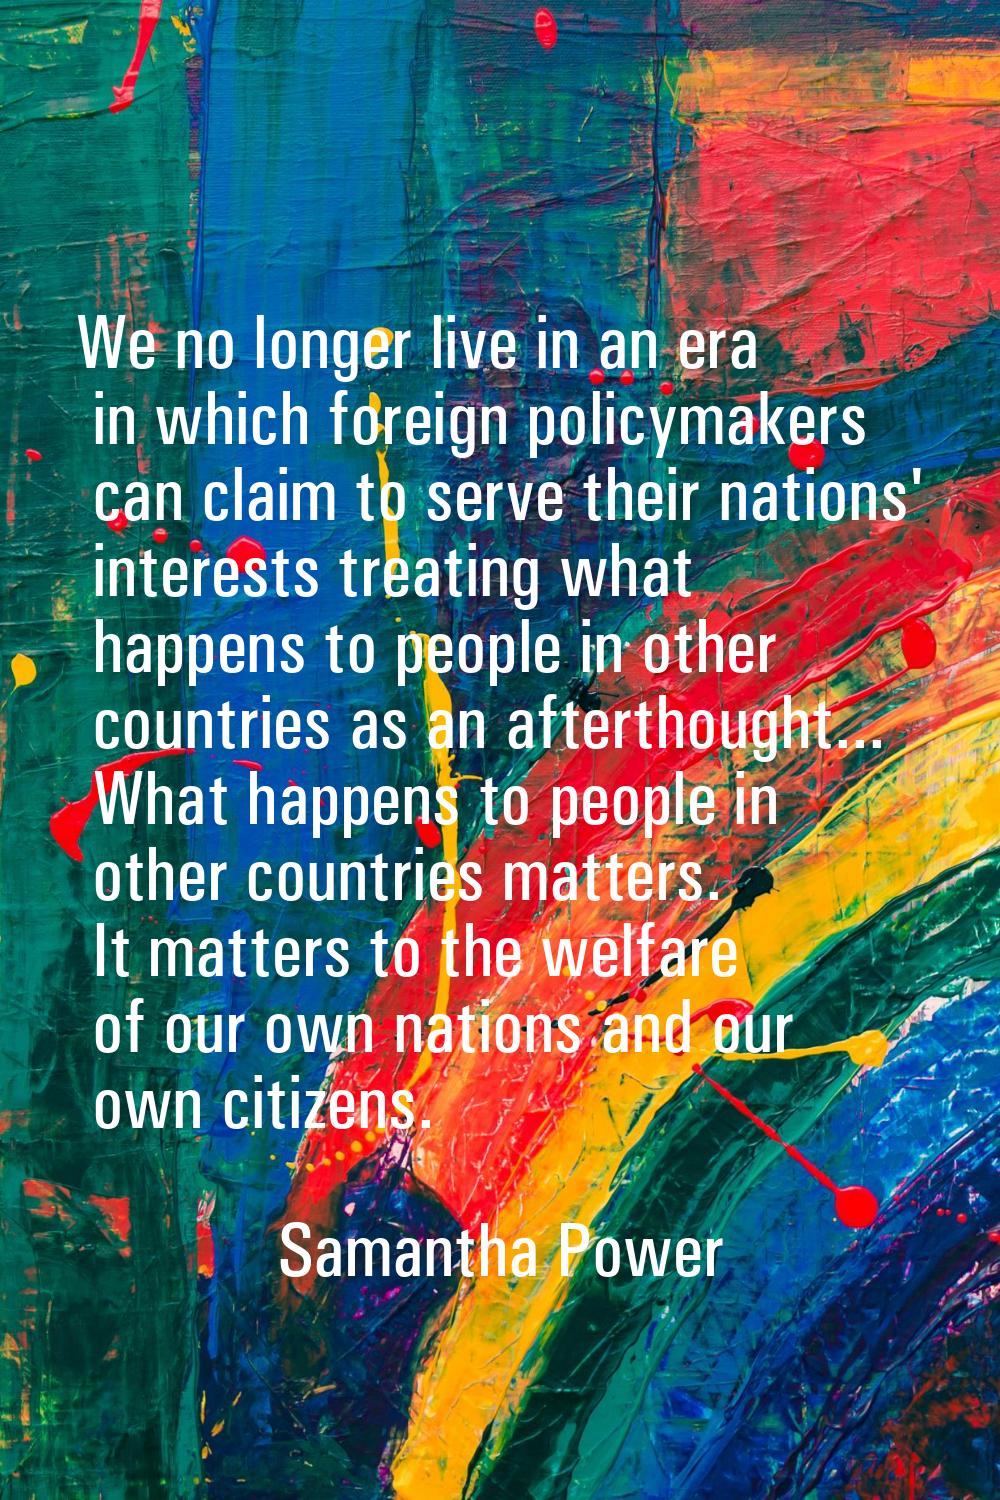 We no longer live in an era in which foreign policymakers can claim to serve their nations' interes